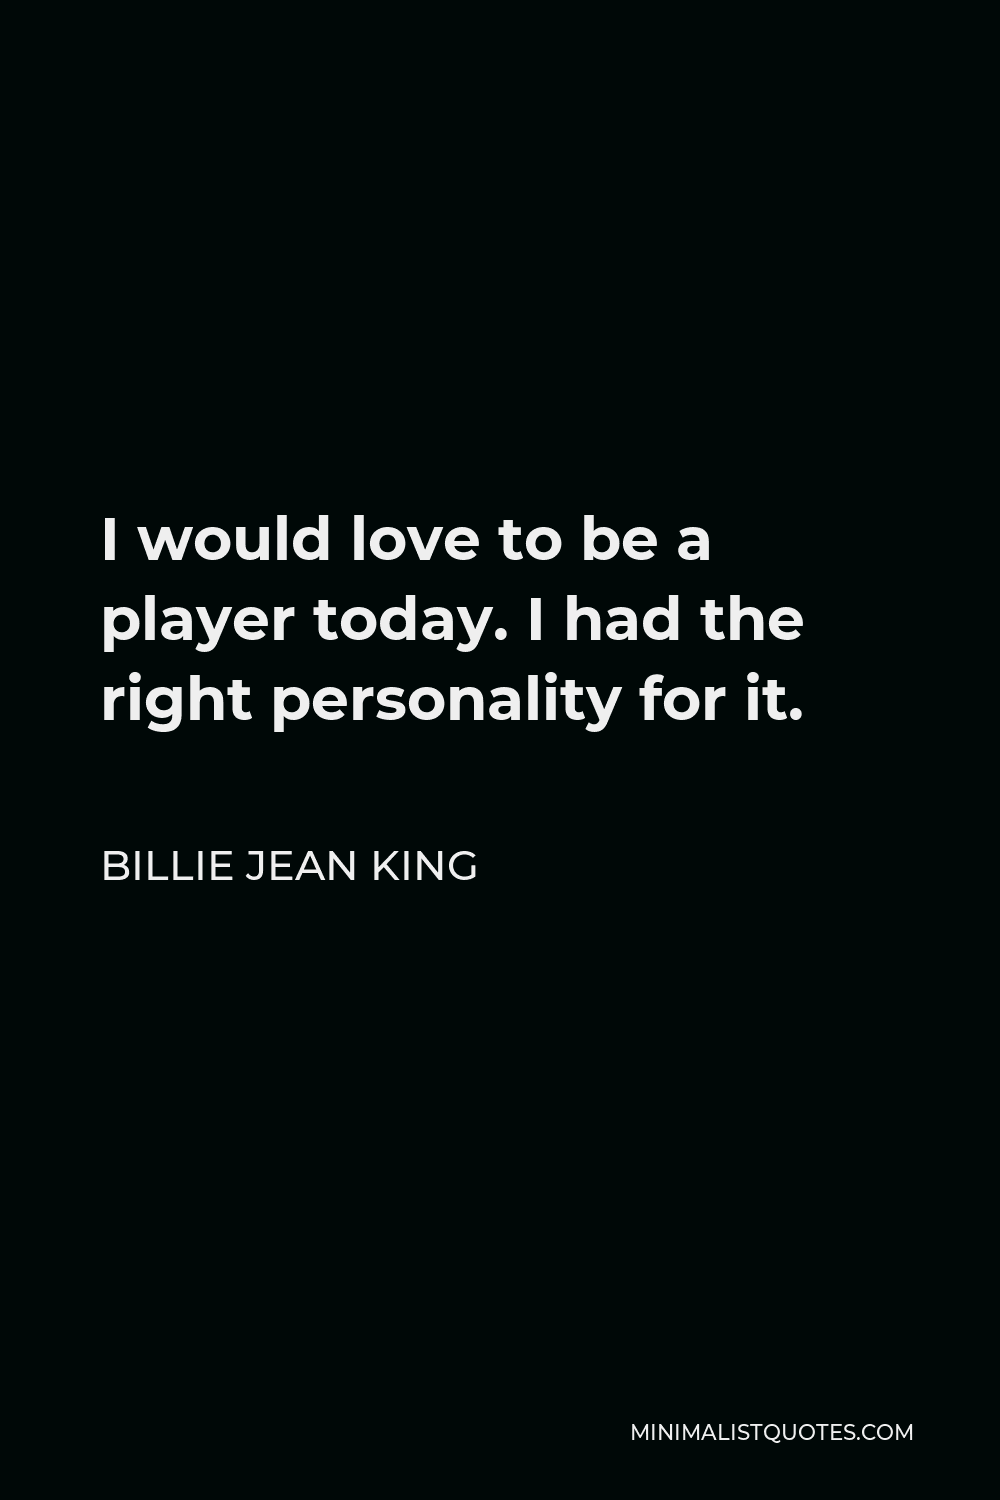 Billie Jean King Quote - I would love to be a player today. I had the right personality for it.